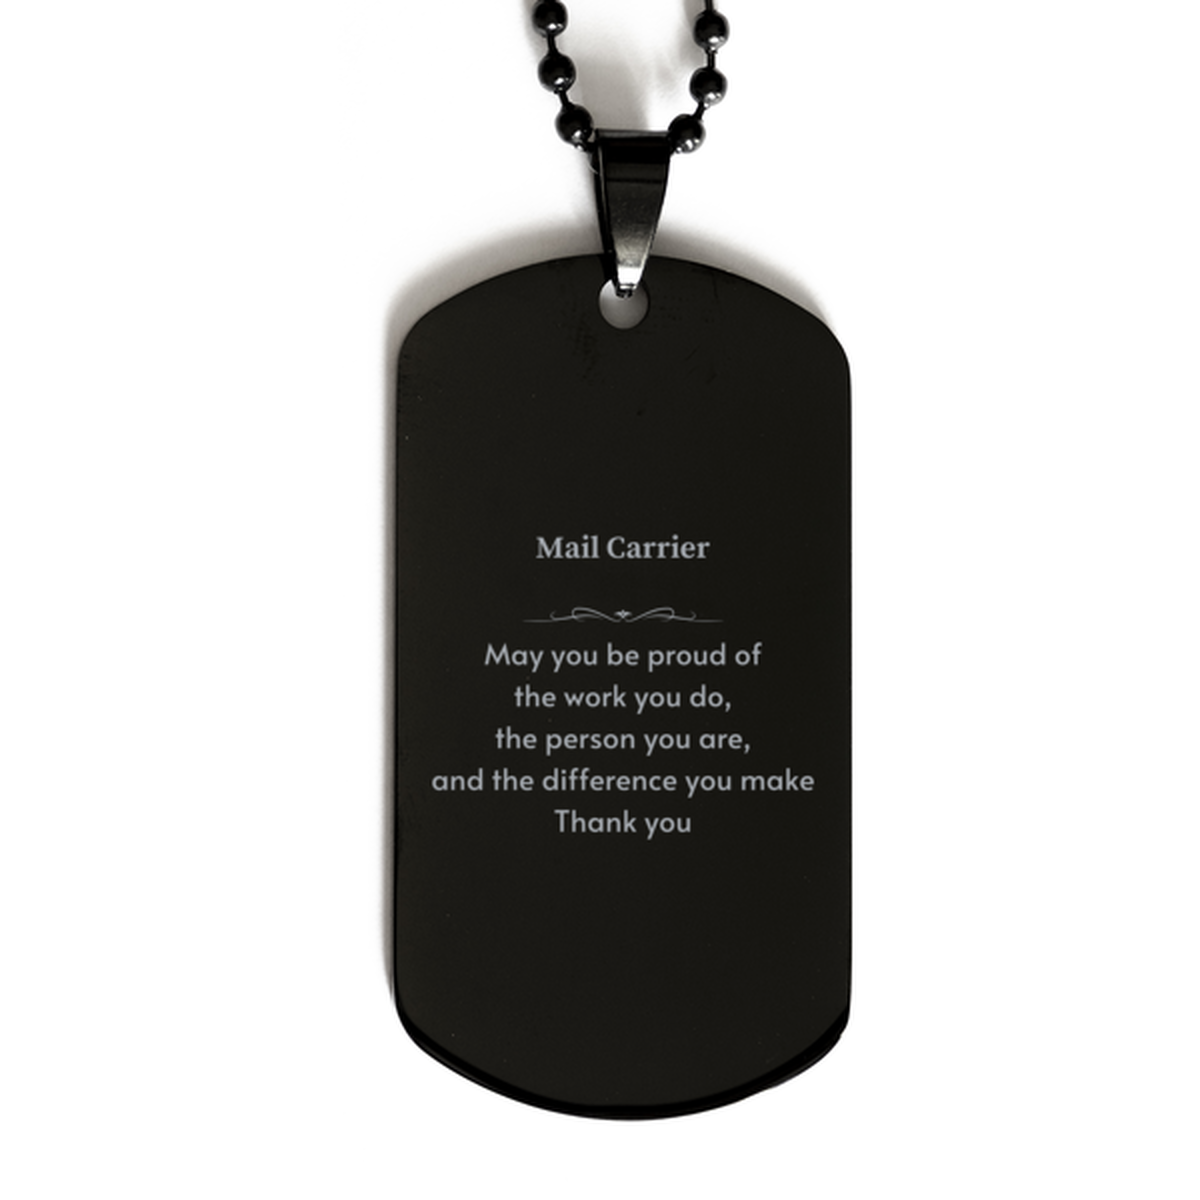 Heartwarming Black Dog Tag Retirement Coworkers Gifts for Mail Carrier, Mail Carrier May You be proud of the work you do, the person you are Gifts for Boss Men Women Friends